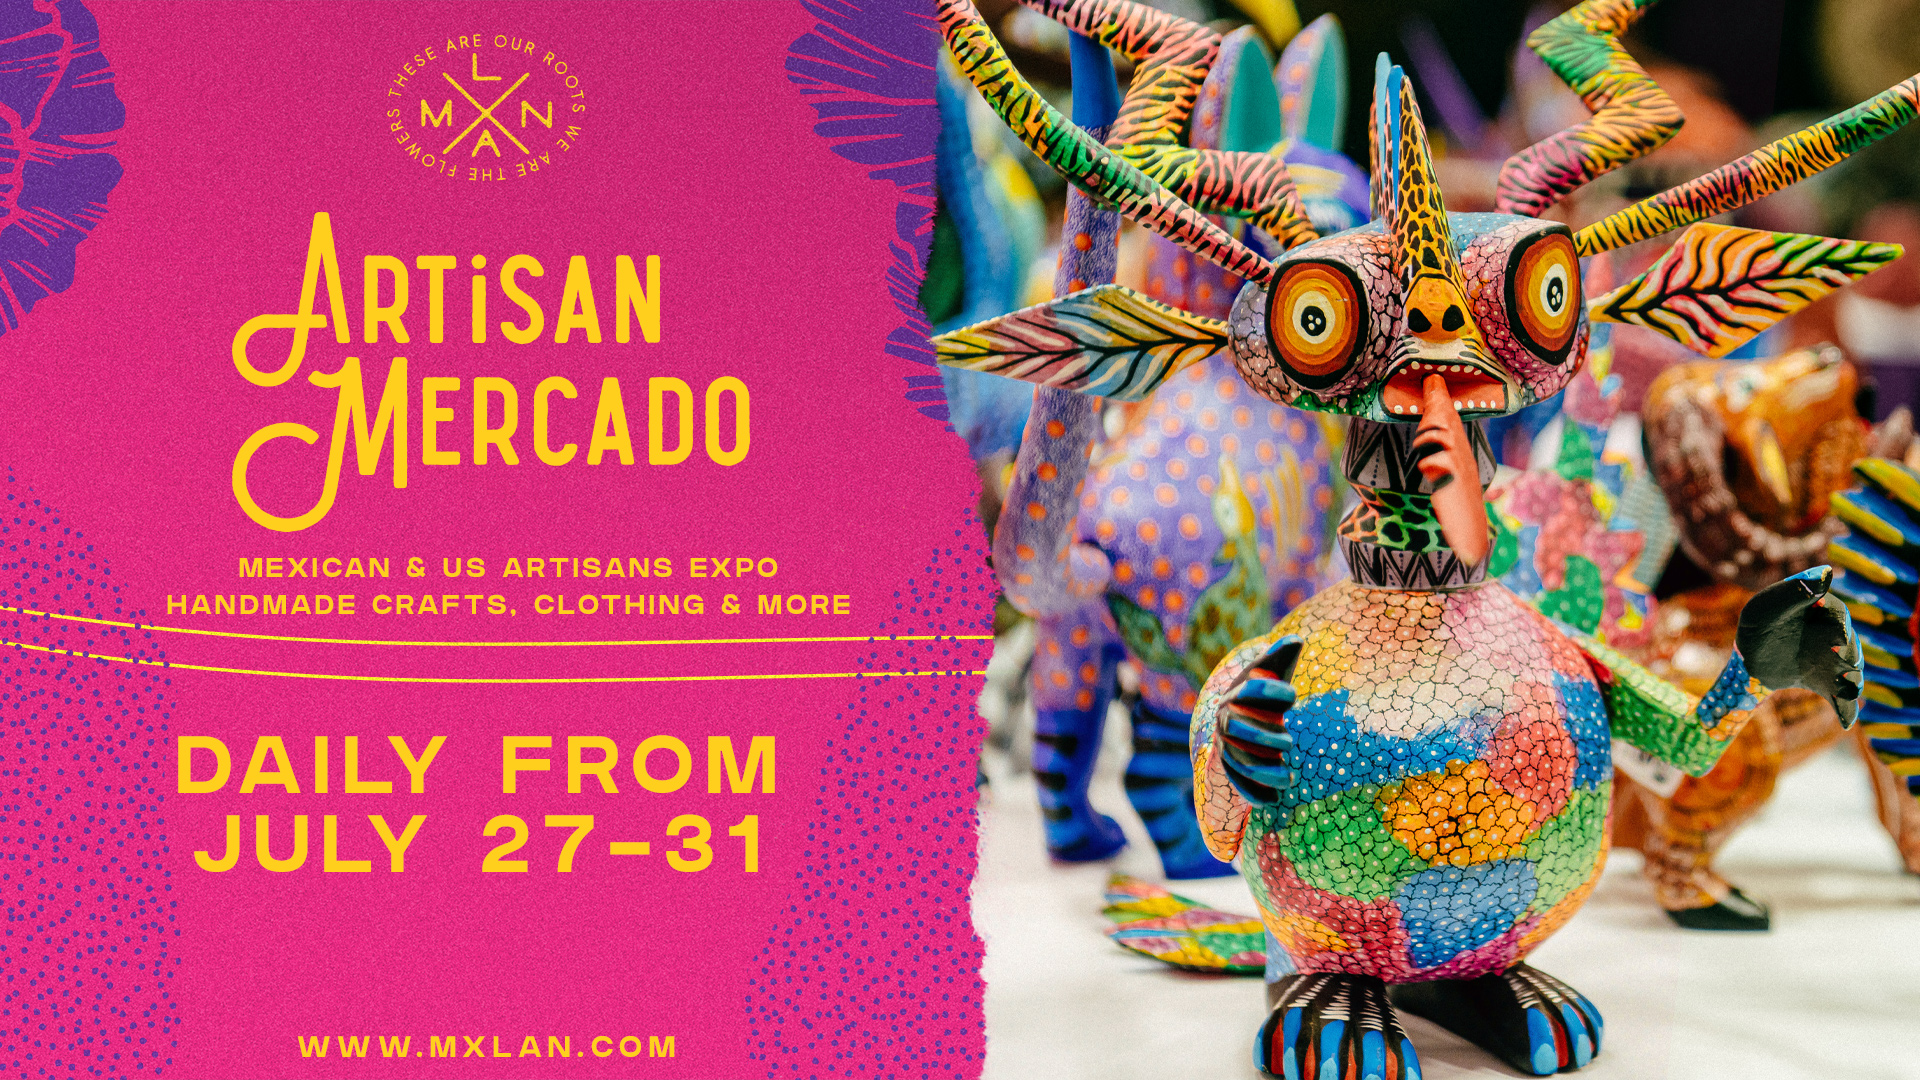 mxlan festival mcallen latino latinx music arts best fesitval in texas acl south by south west coachella rio grande valley south padre island brownsville indie best latino festival in us ARTISAN MERCADO